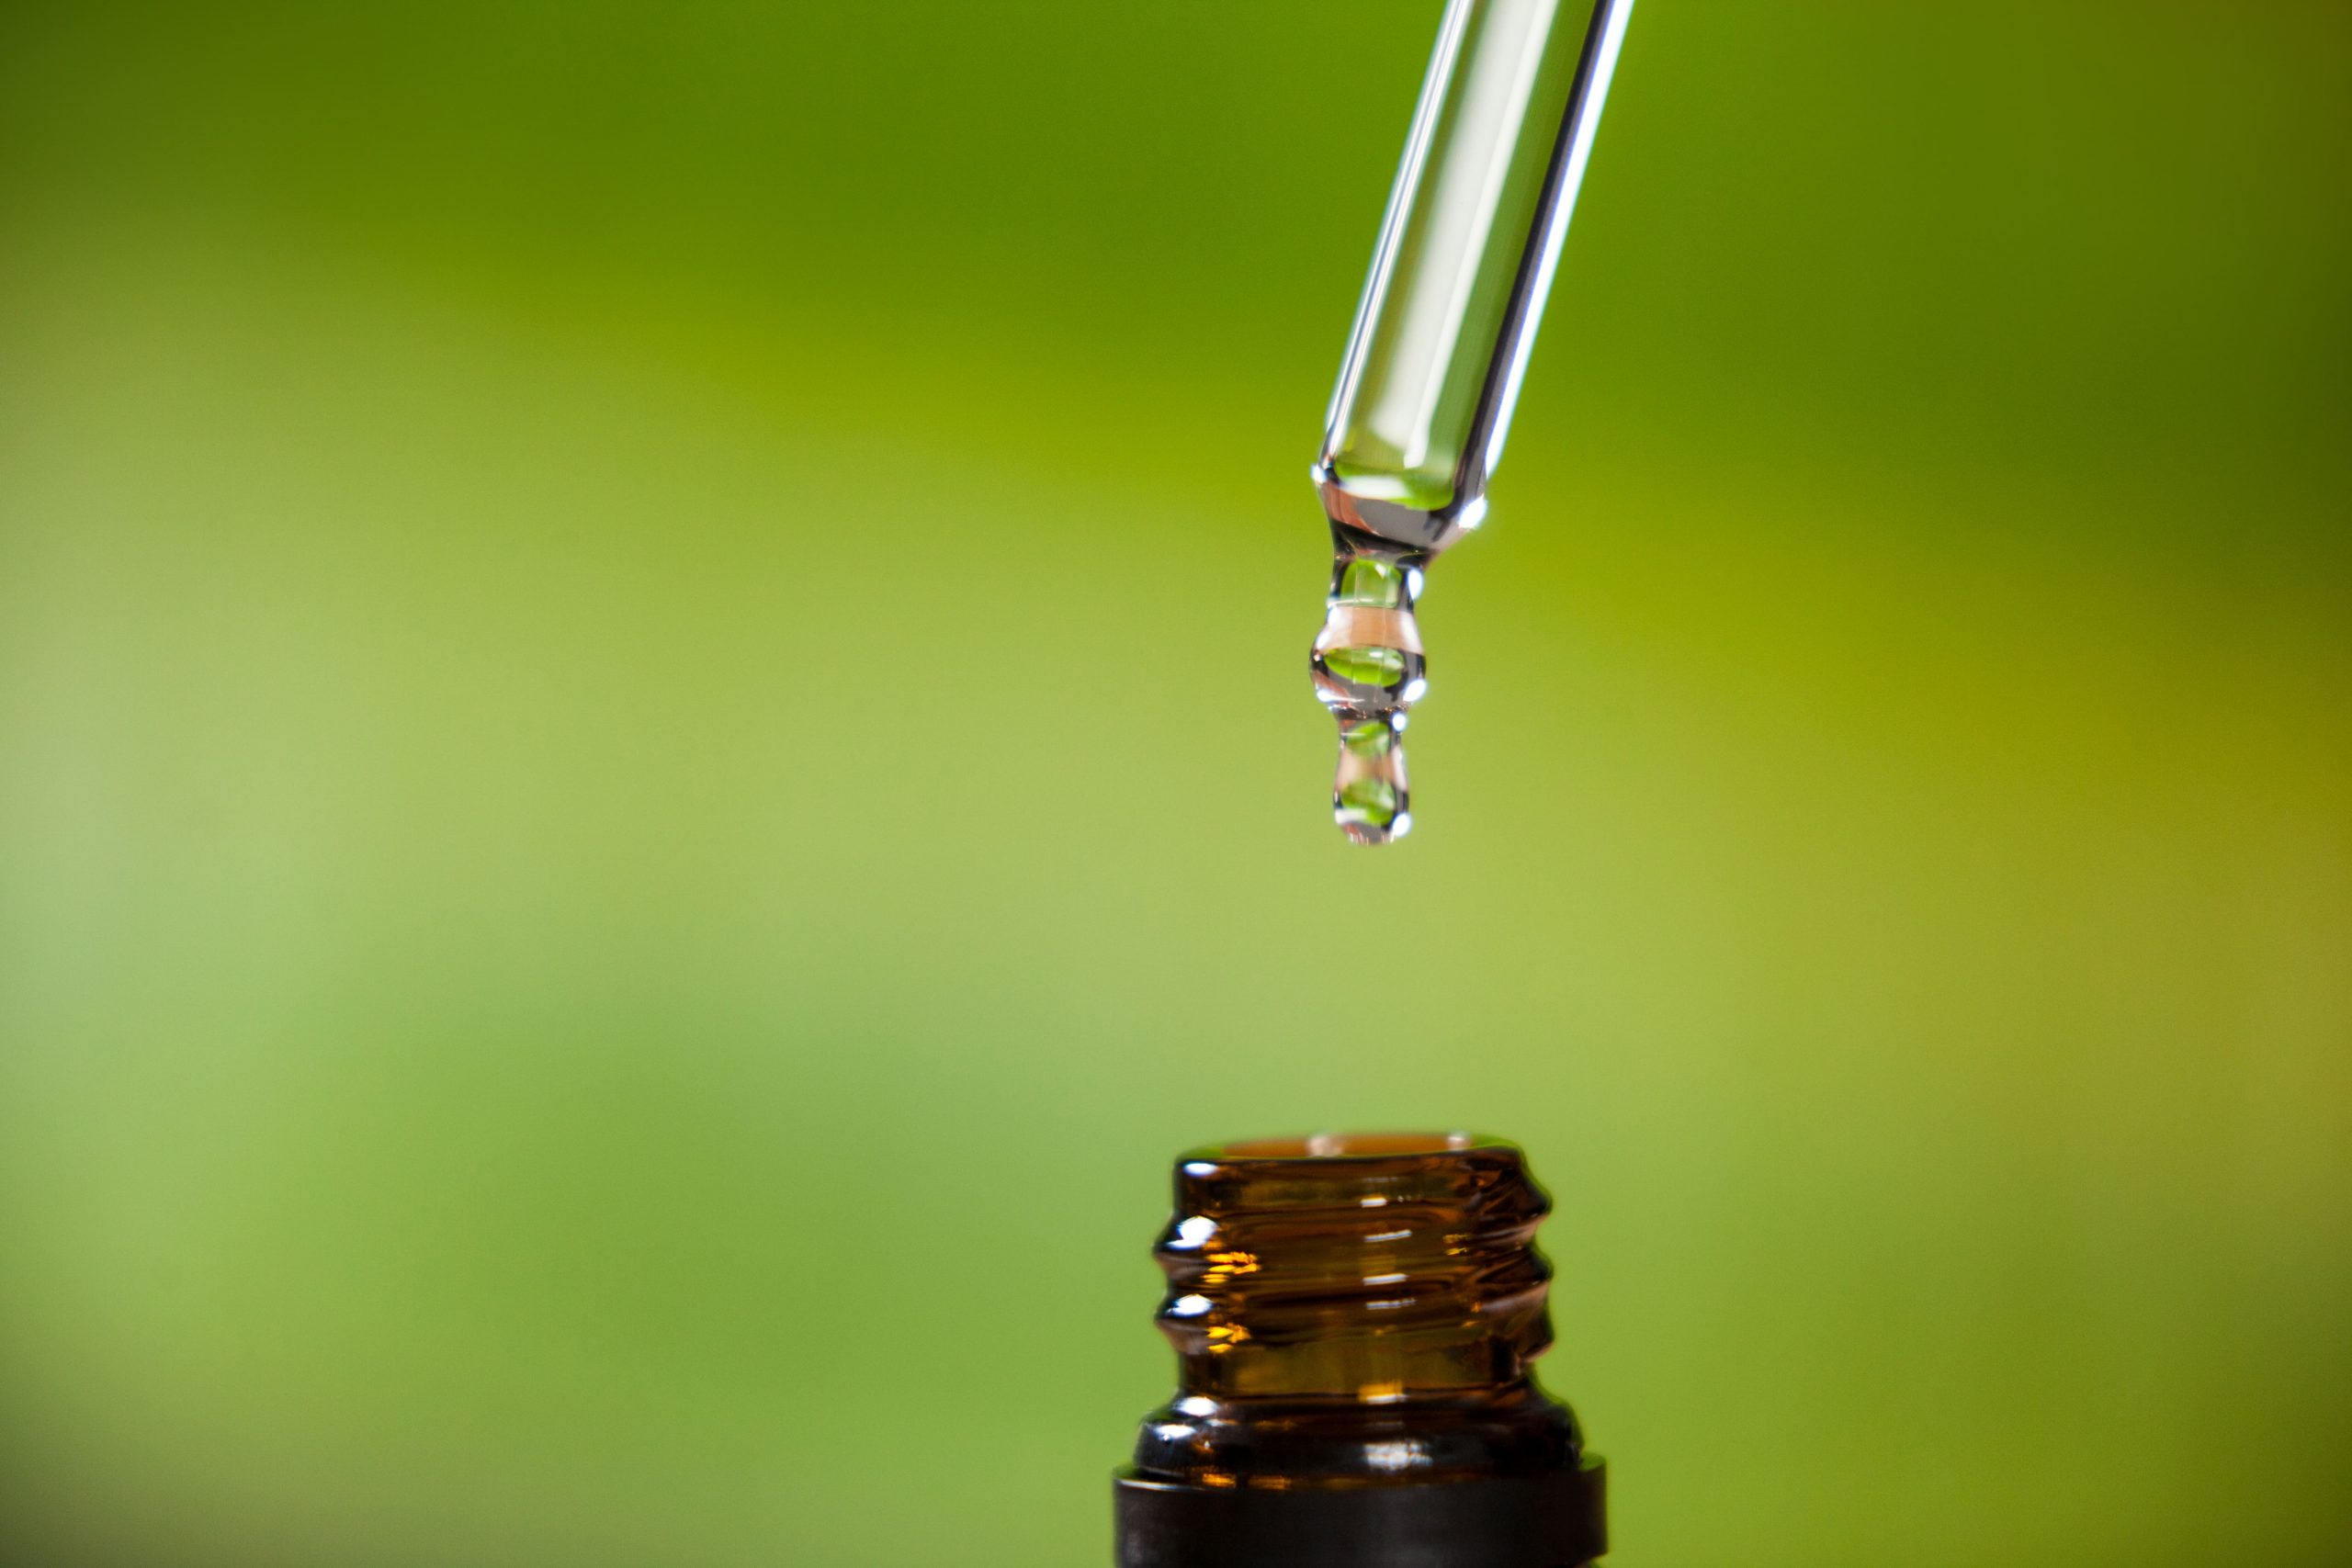 drop-of-oil-dripping-from-pipette-into-bottle-of-essential-oil (2)